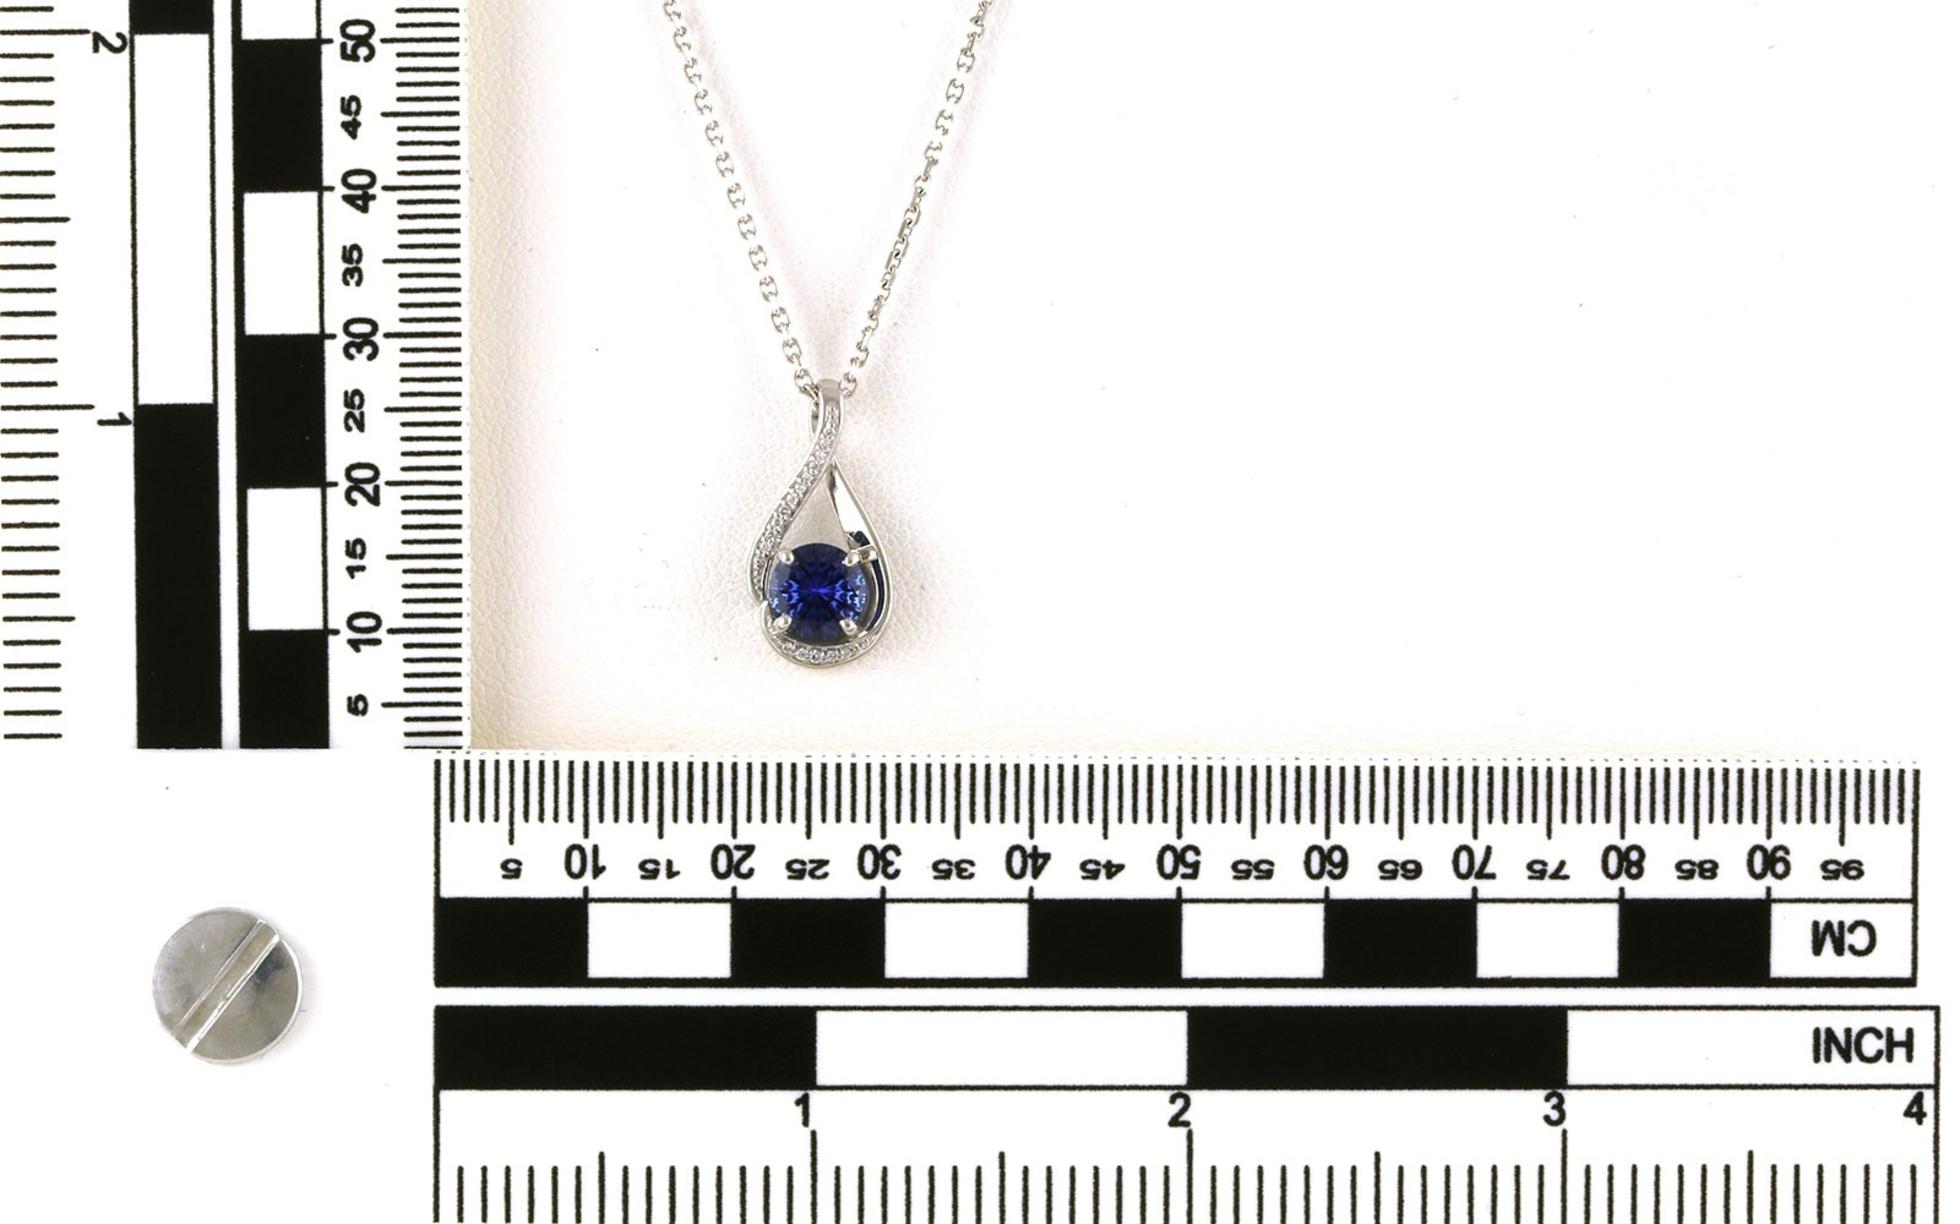 Teardrop Montana Yogo Sapphire and Pave Diamond Necklace in White Gold (1.35cts TWT) Scale